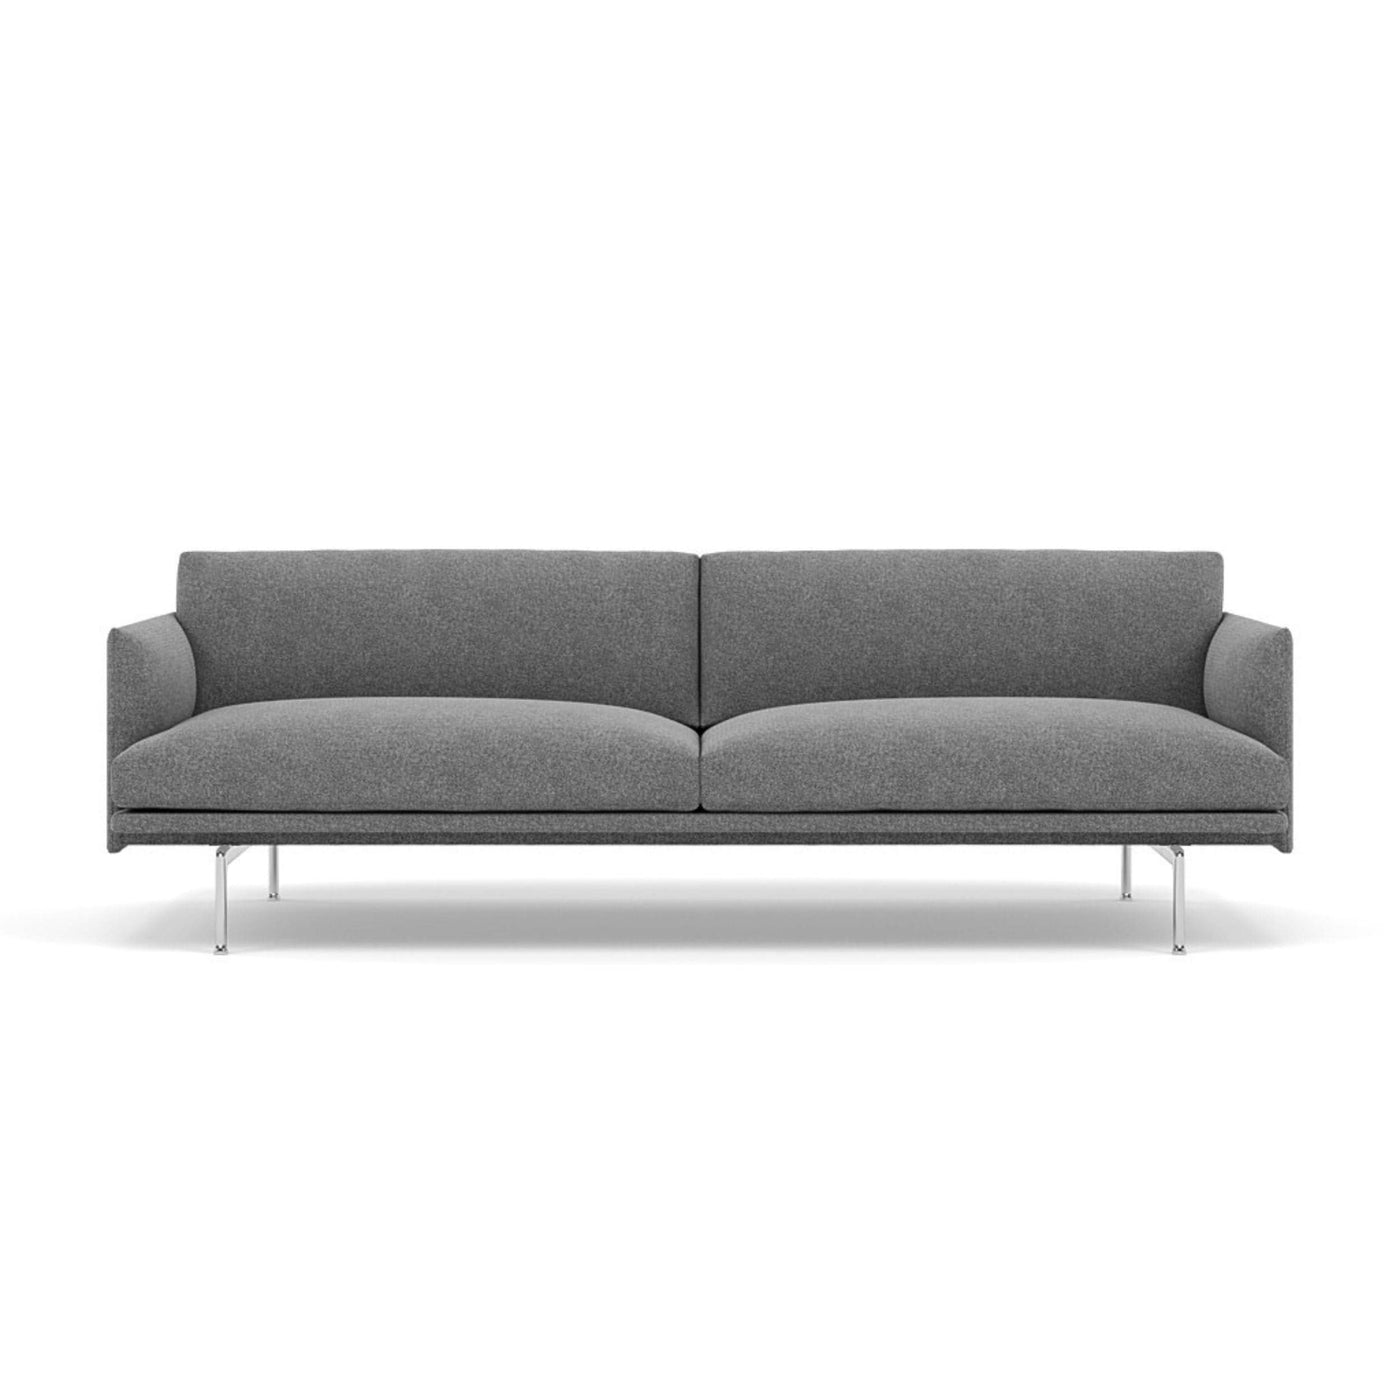 Muuto outline 3 seater sofa with polished aluminium legs. Made to order from someday designs. #colour_hallingdal-166